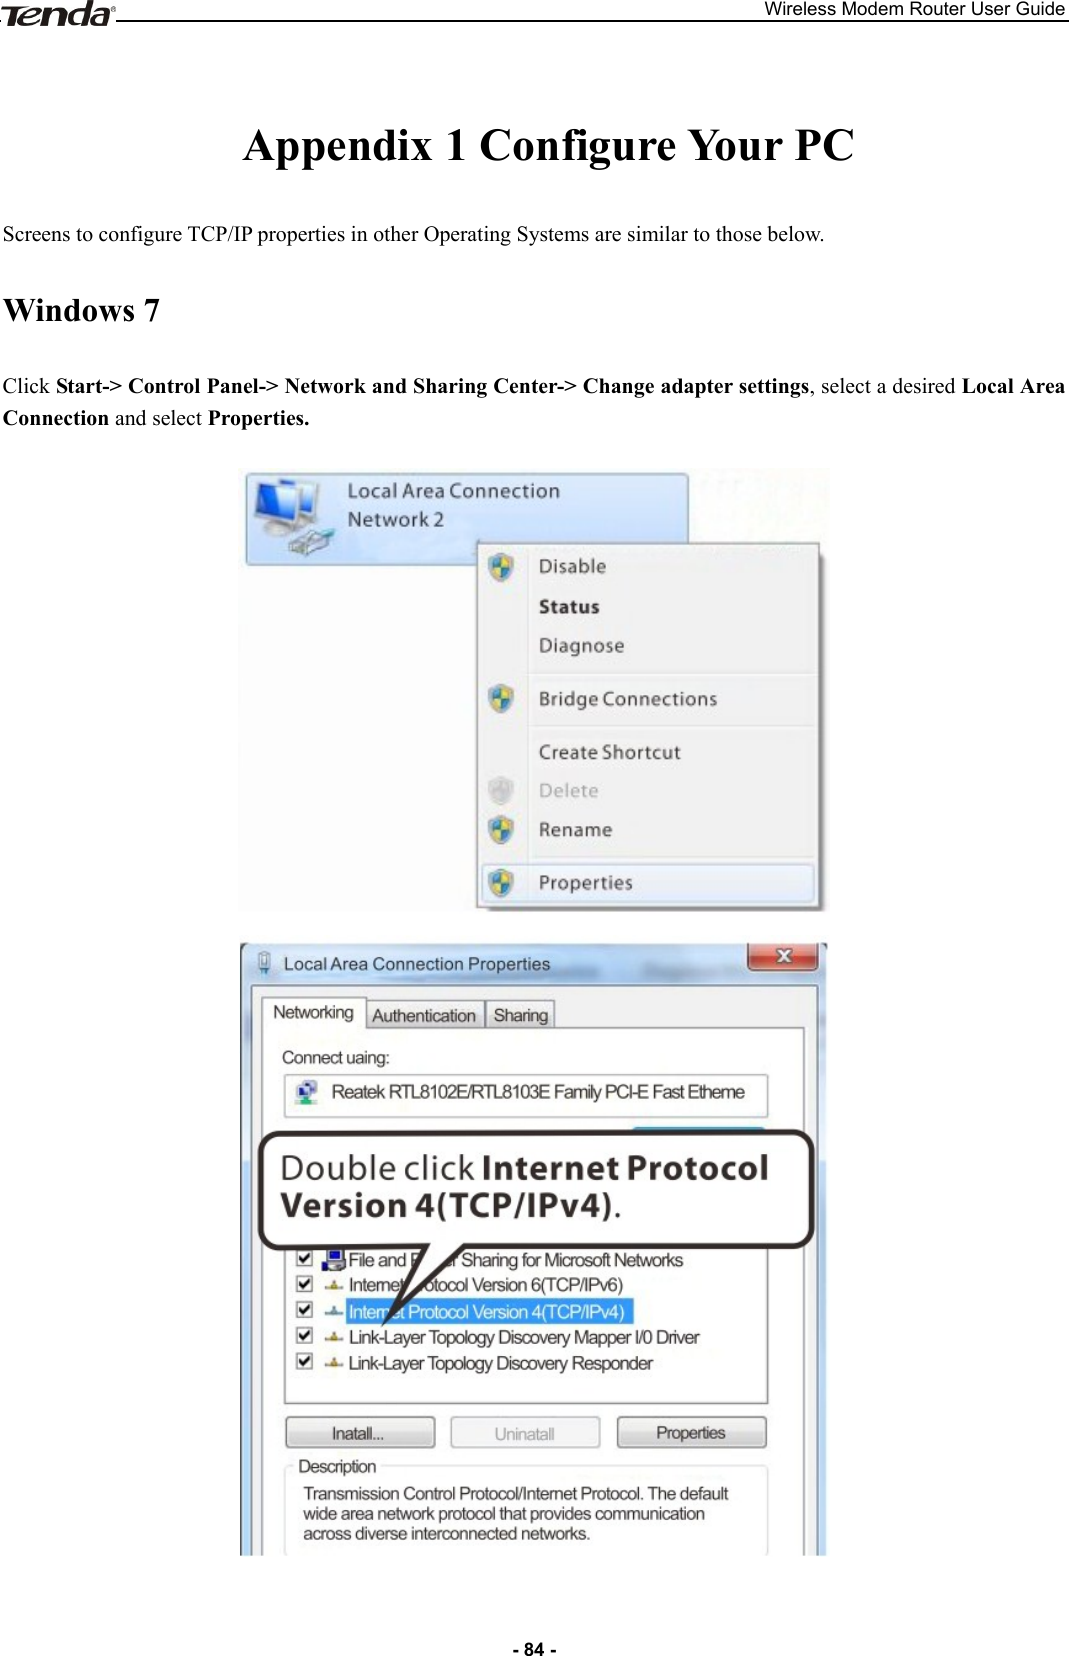 Wireless Modem Router User Guide - 84 -  Appendix 1 Configure Your PC Screens to configure TCP/IP properties in other Operating Systems are similar to those below.   Windows 7 Click Start-&gt; Control Panel-&gt; Network and Sharing Center-&gt; Change adapter settings, select a desired Local Area Connection and select Properties.    